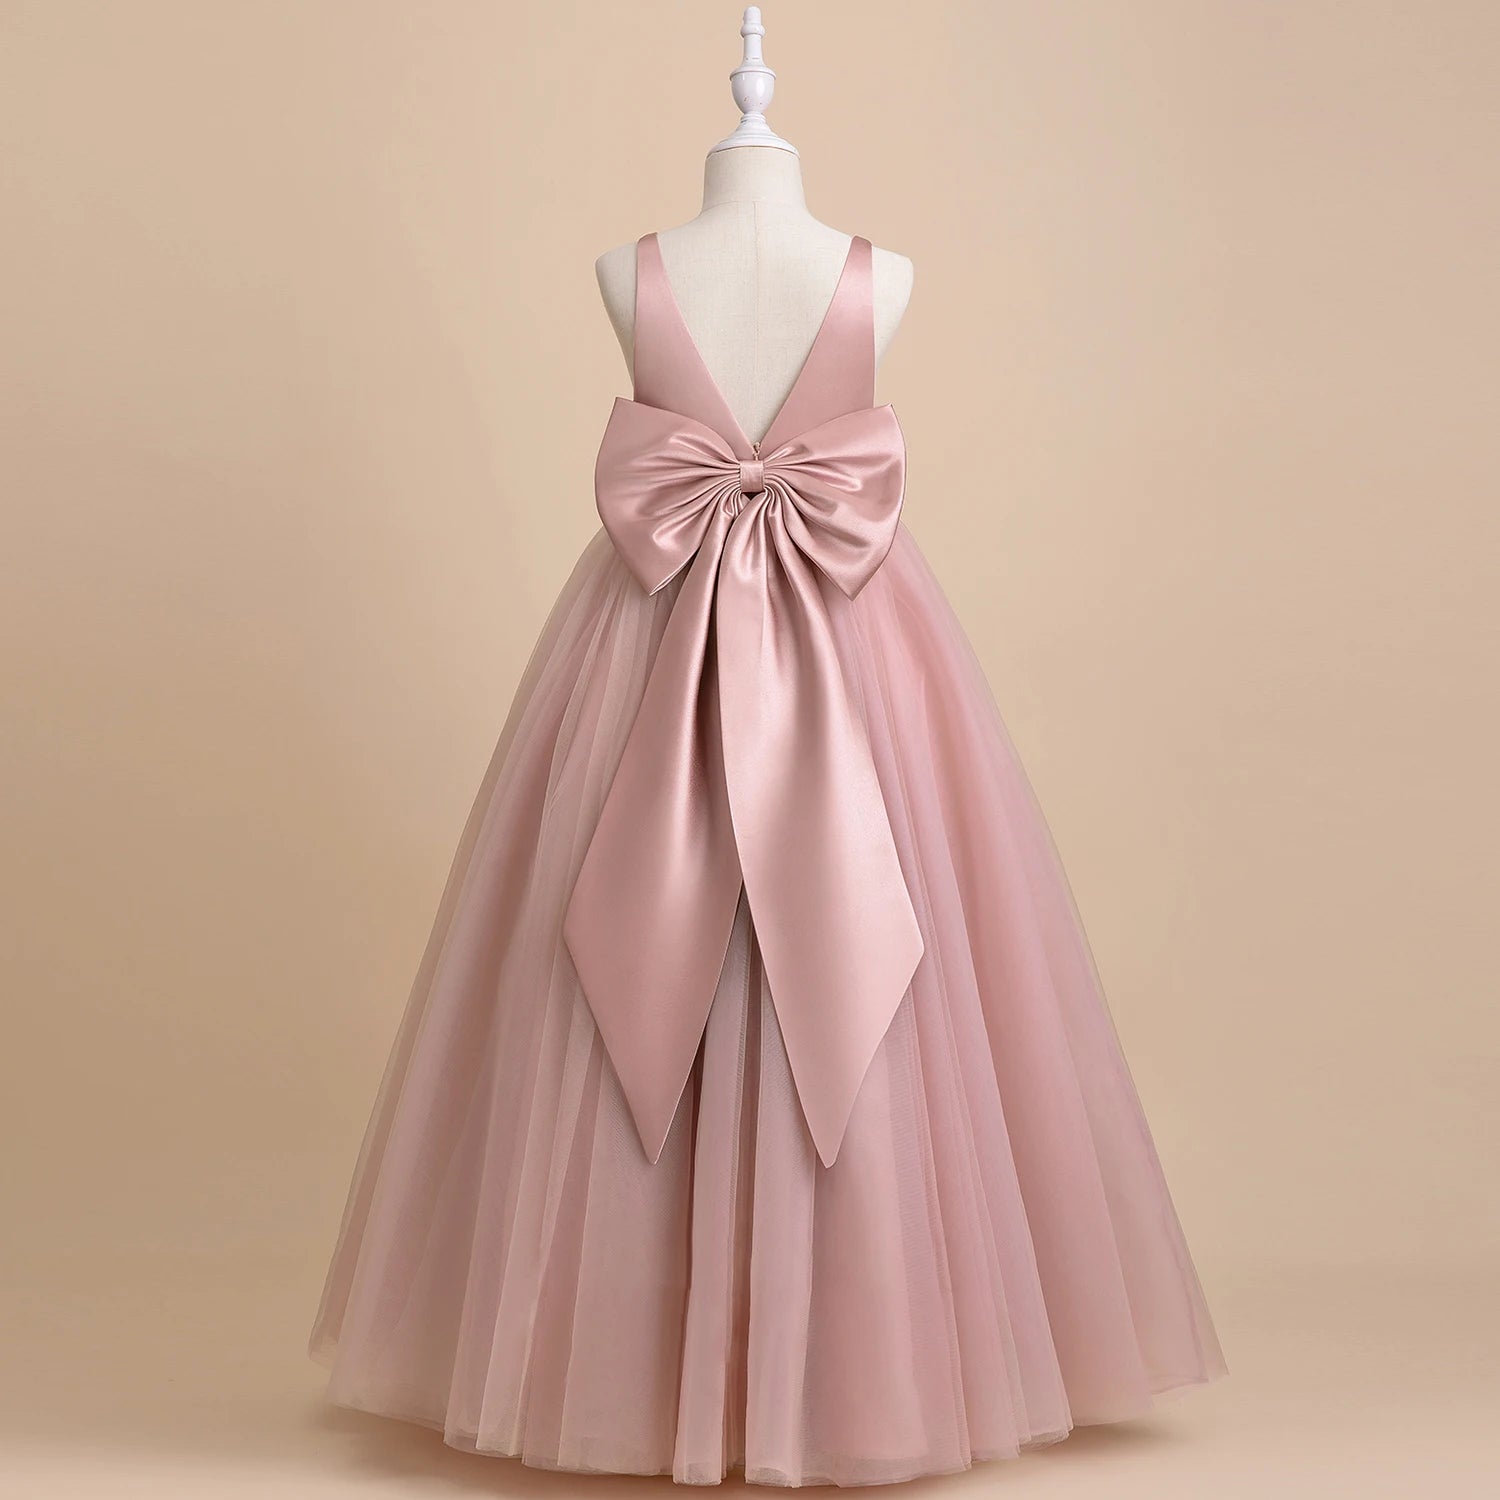 V-Neck Ball Gown Flower Girl Dress With Tulle pink by Baby Minaj Cruz